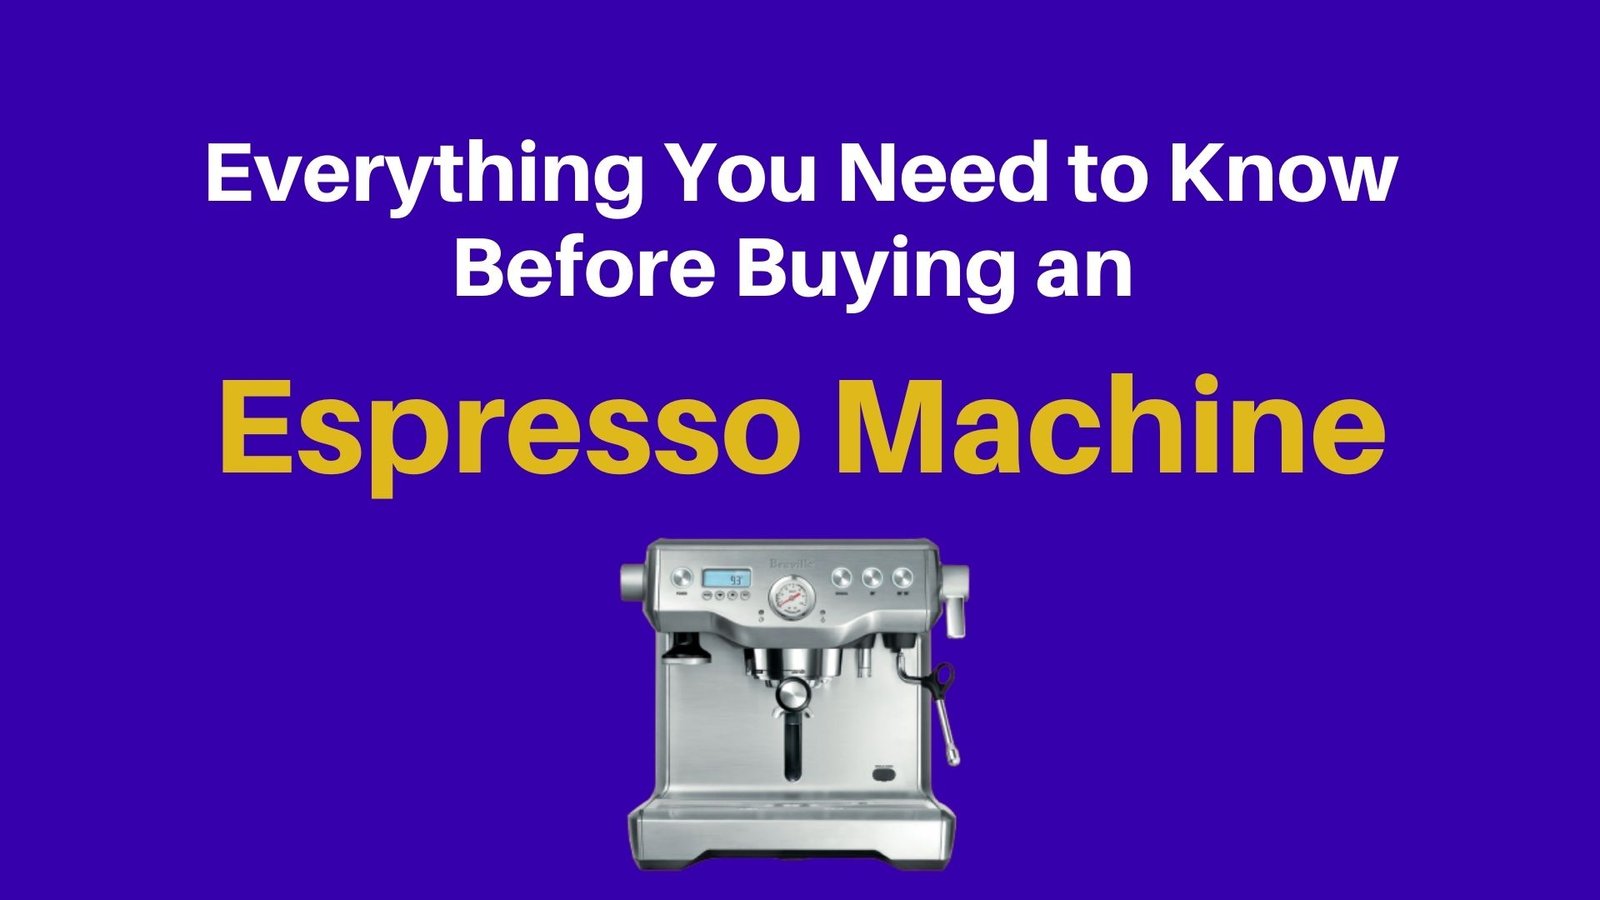 Everything You Need to Know Before Buying an Espresso Machine